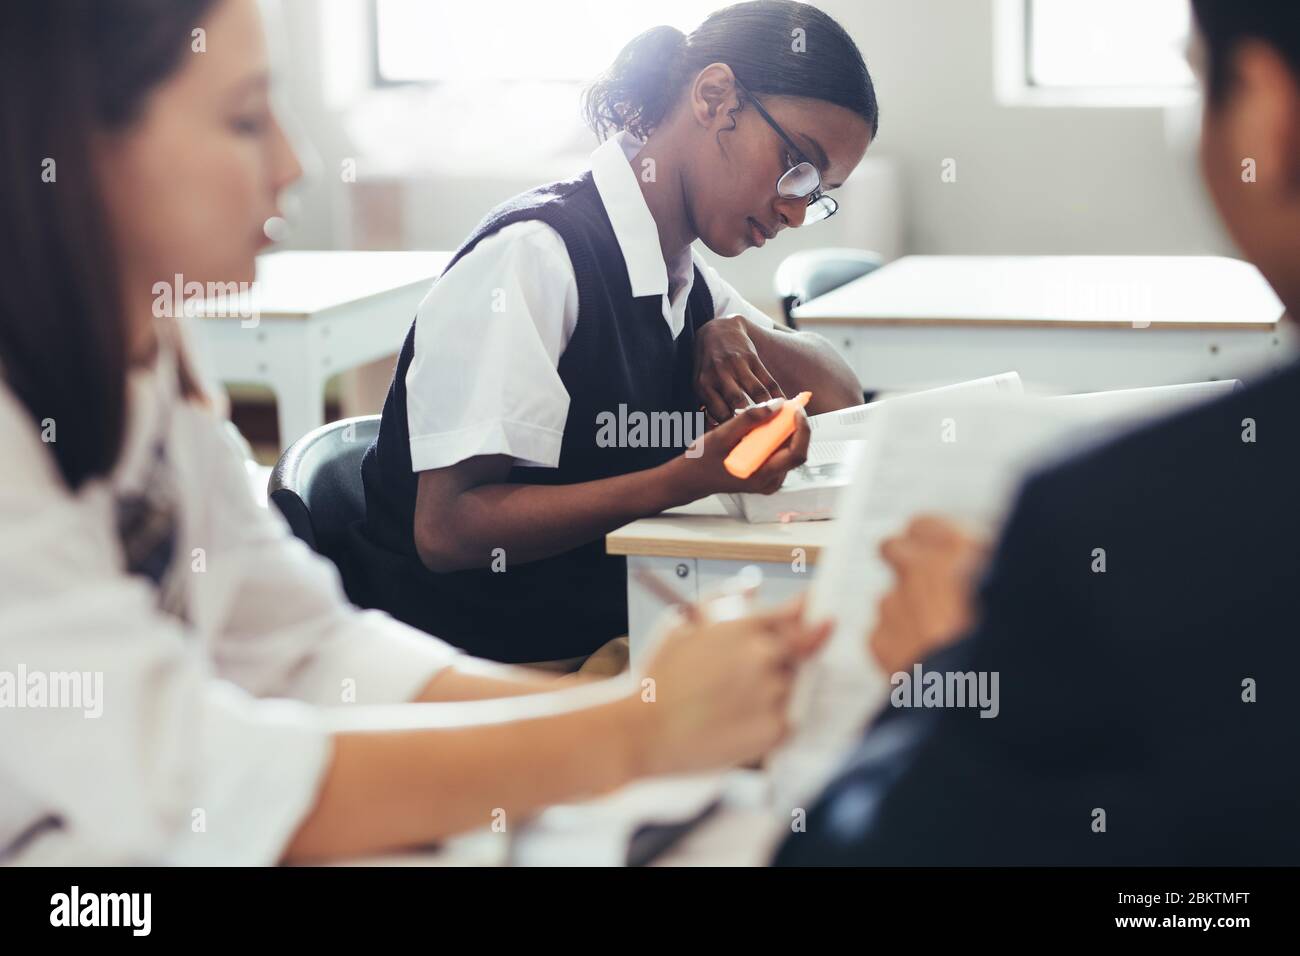 High school students wearing uniform sitting at desk in classroom. Female student studying in classroom with classmate discussing in front. Stock Photo